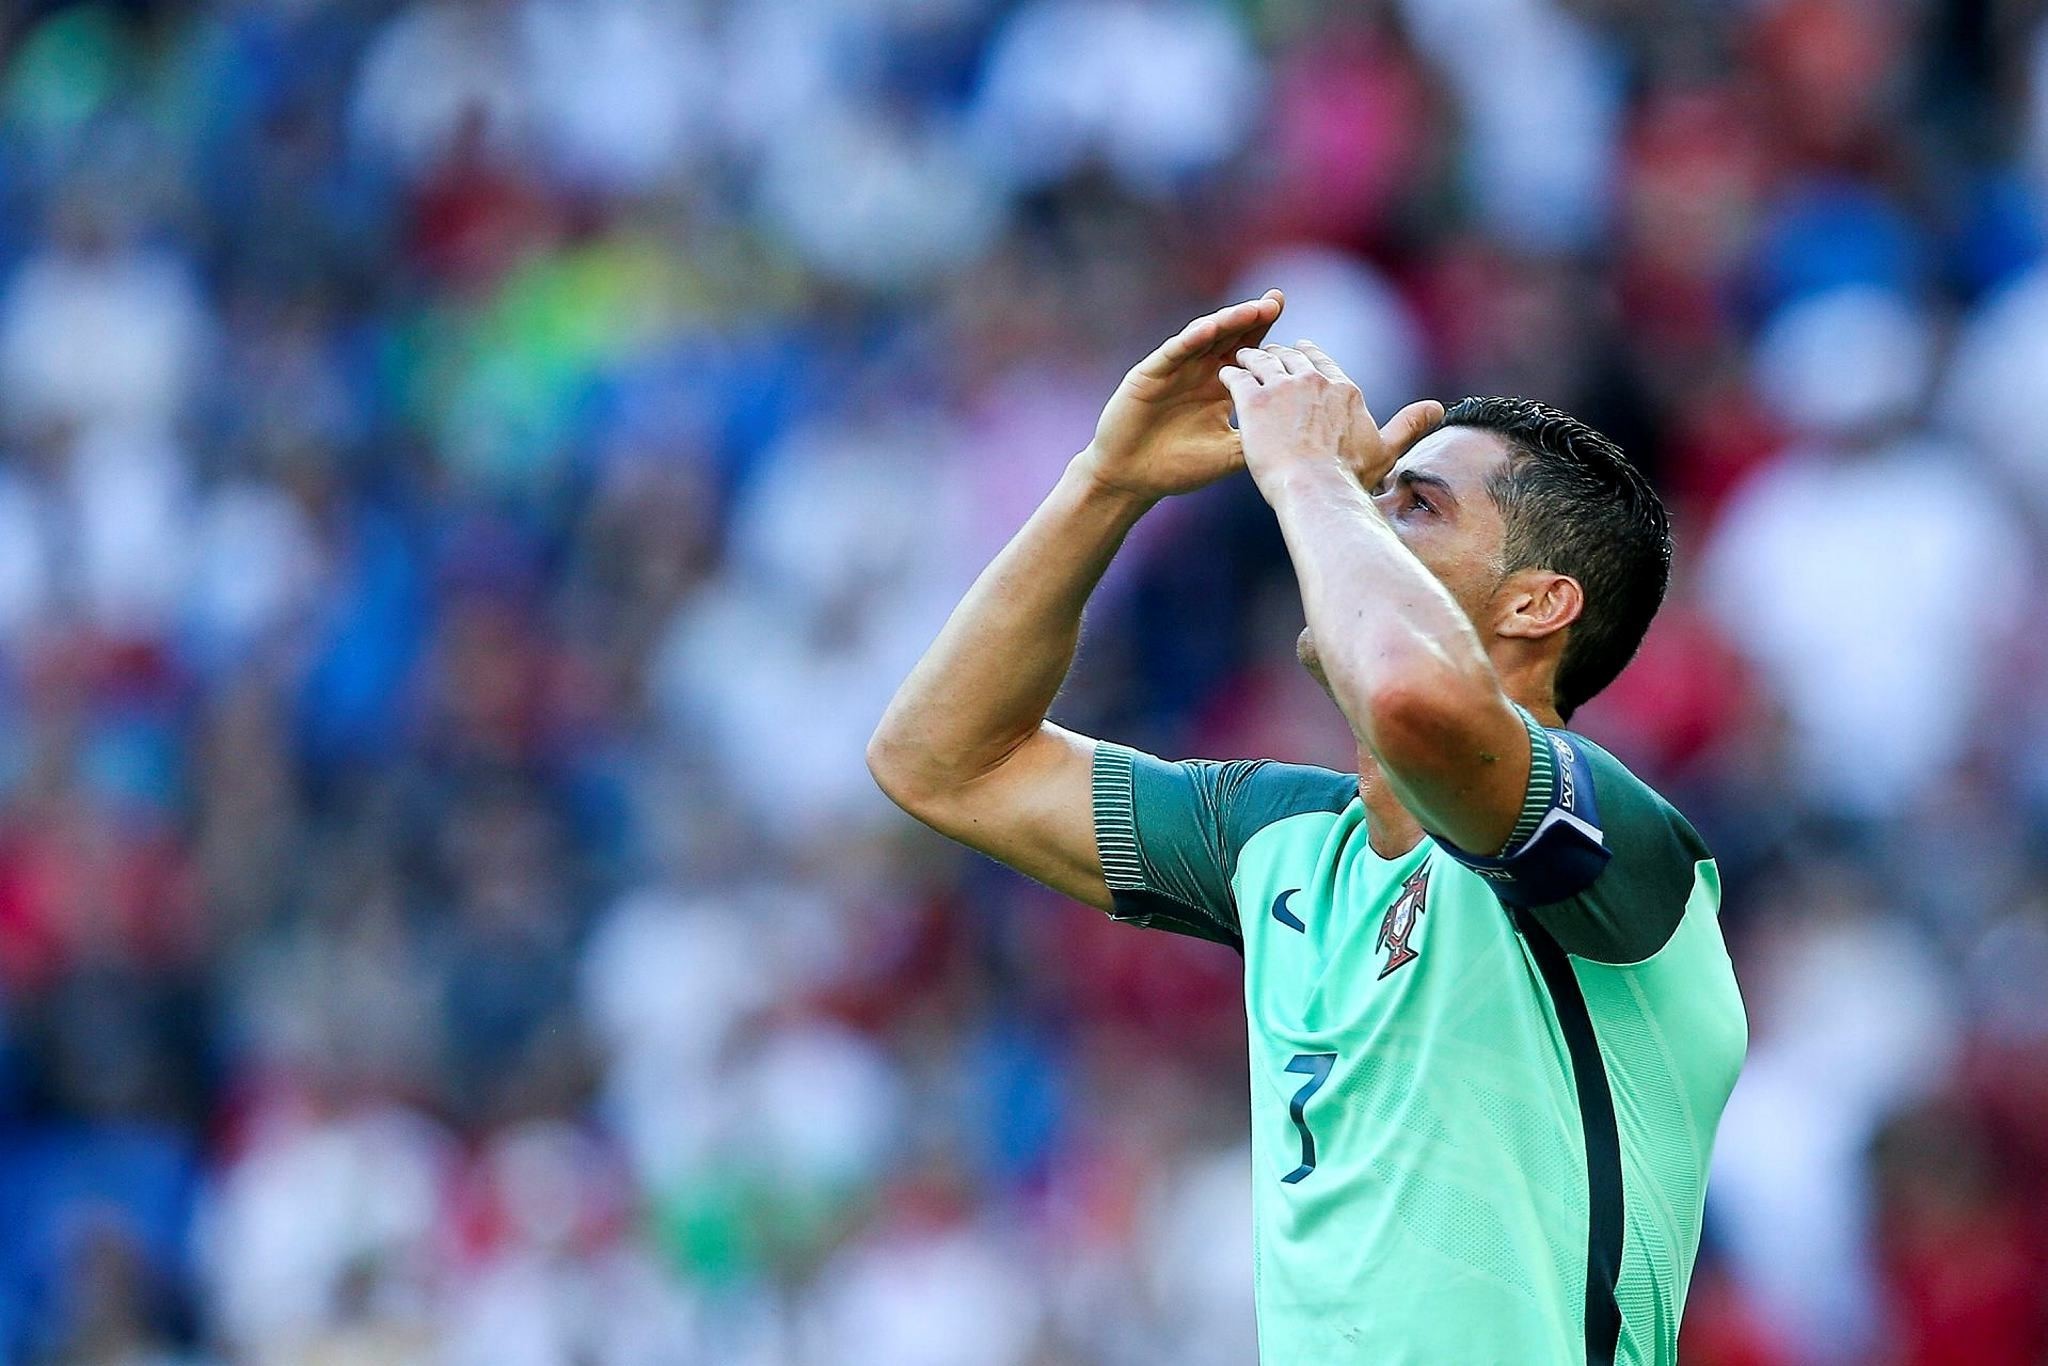 Portugal's Cristiano Ronaldo reacts during the UEFA EURO 2016 group F preliminary round match between Hungary and Portugal at Stade de Lyon in Lyon, France, 22 June 2016. (EPA Photo)